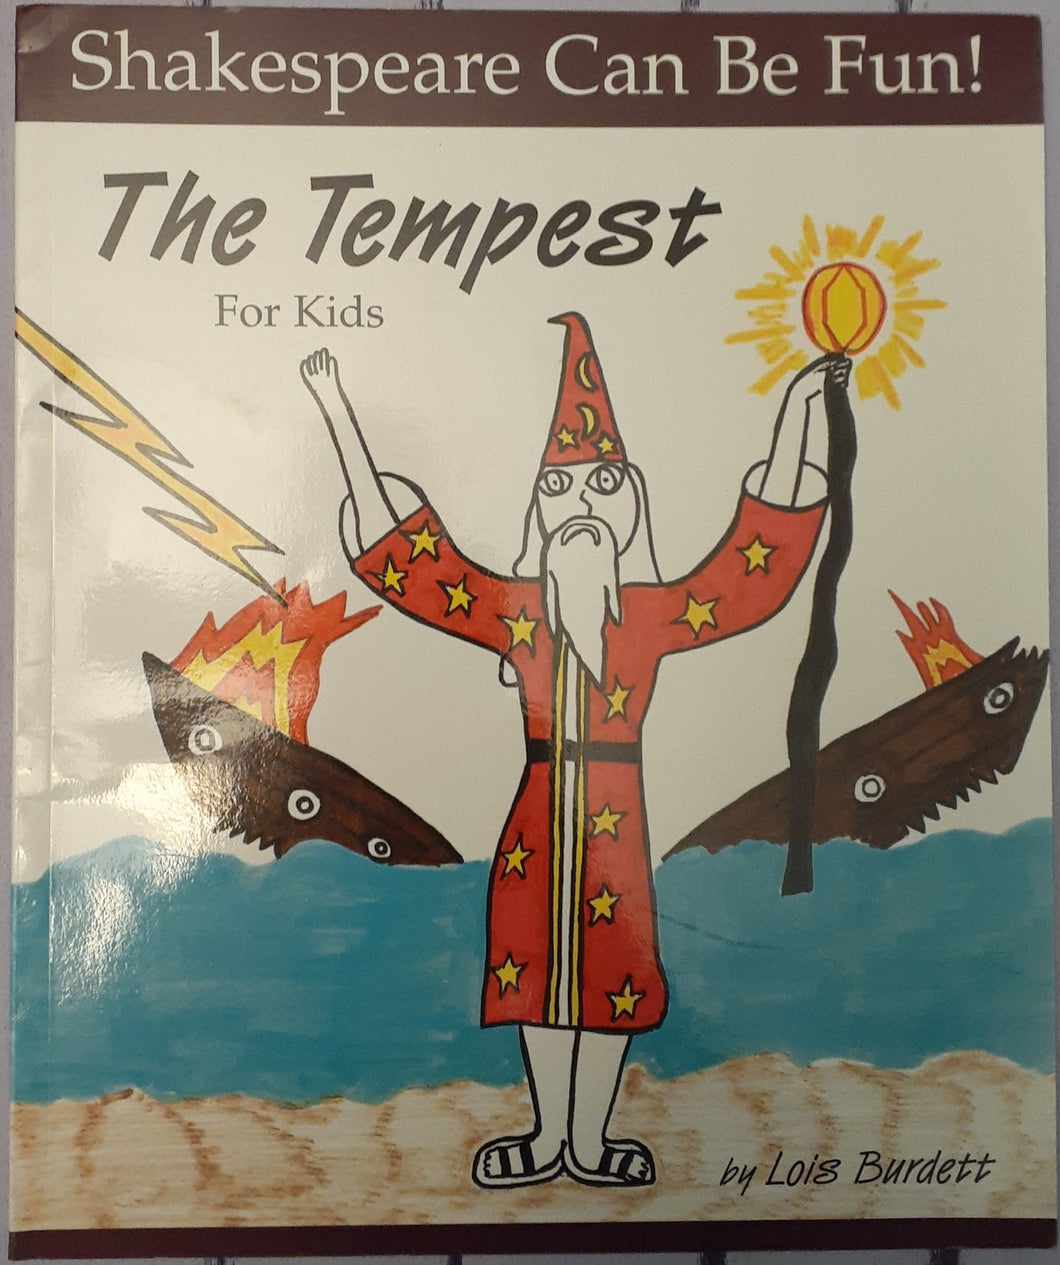 Shakespeare Can Be Fun! - The Tempest